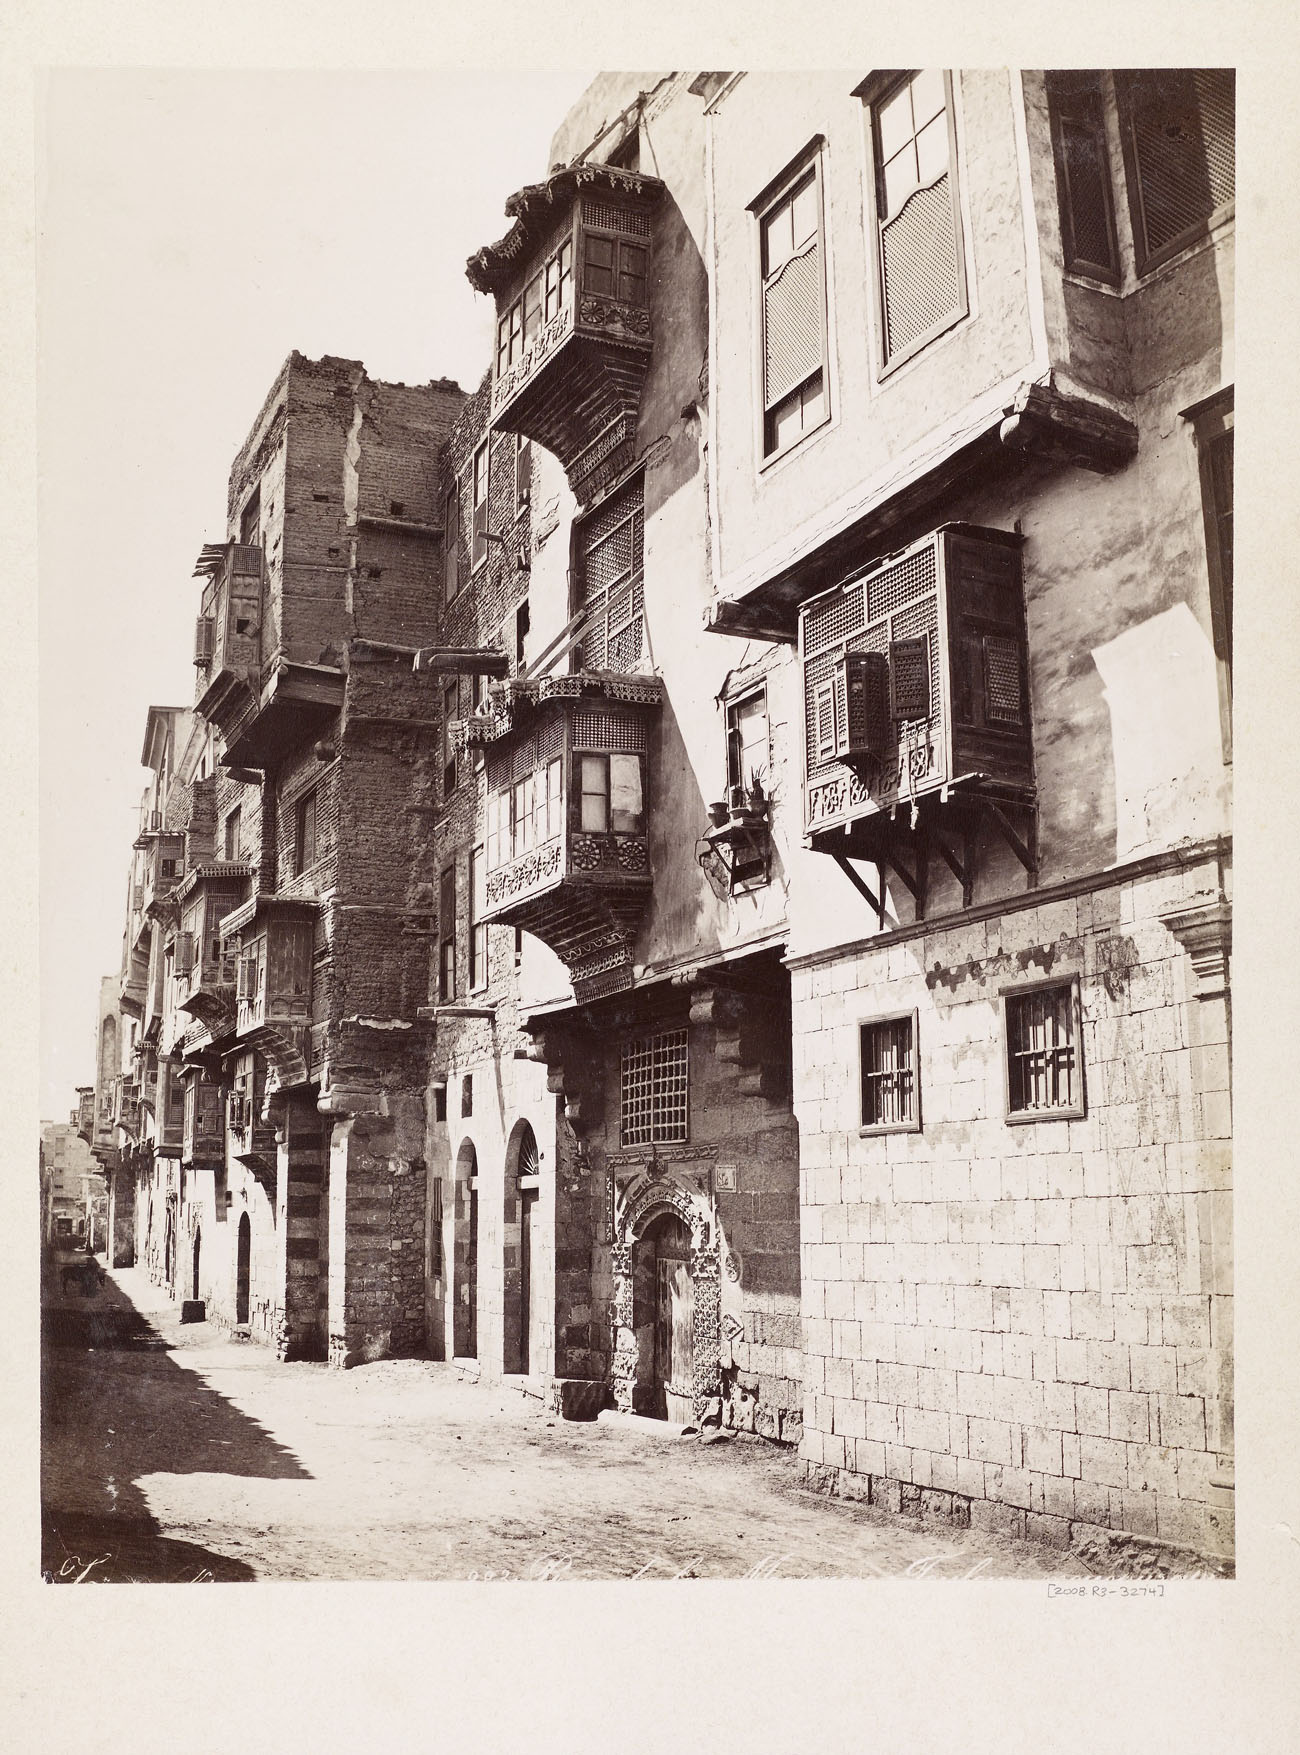 Cairo street, about 1875, Zangaki Brothers. Albumen print mounted on period card, 20.5 x 27.7 cm. The Getty Research Institute, 2008.R.3. Ken and Jenny Jacobson Orientalist Photography Collection